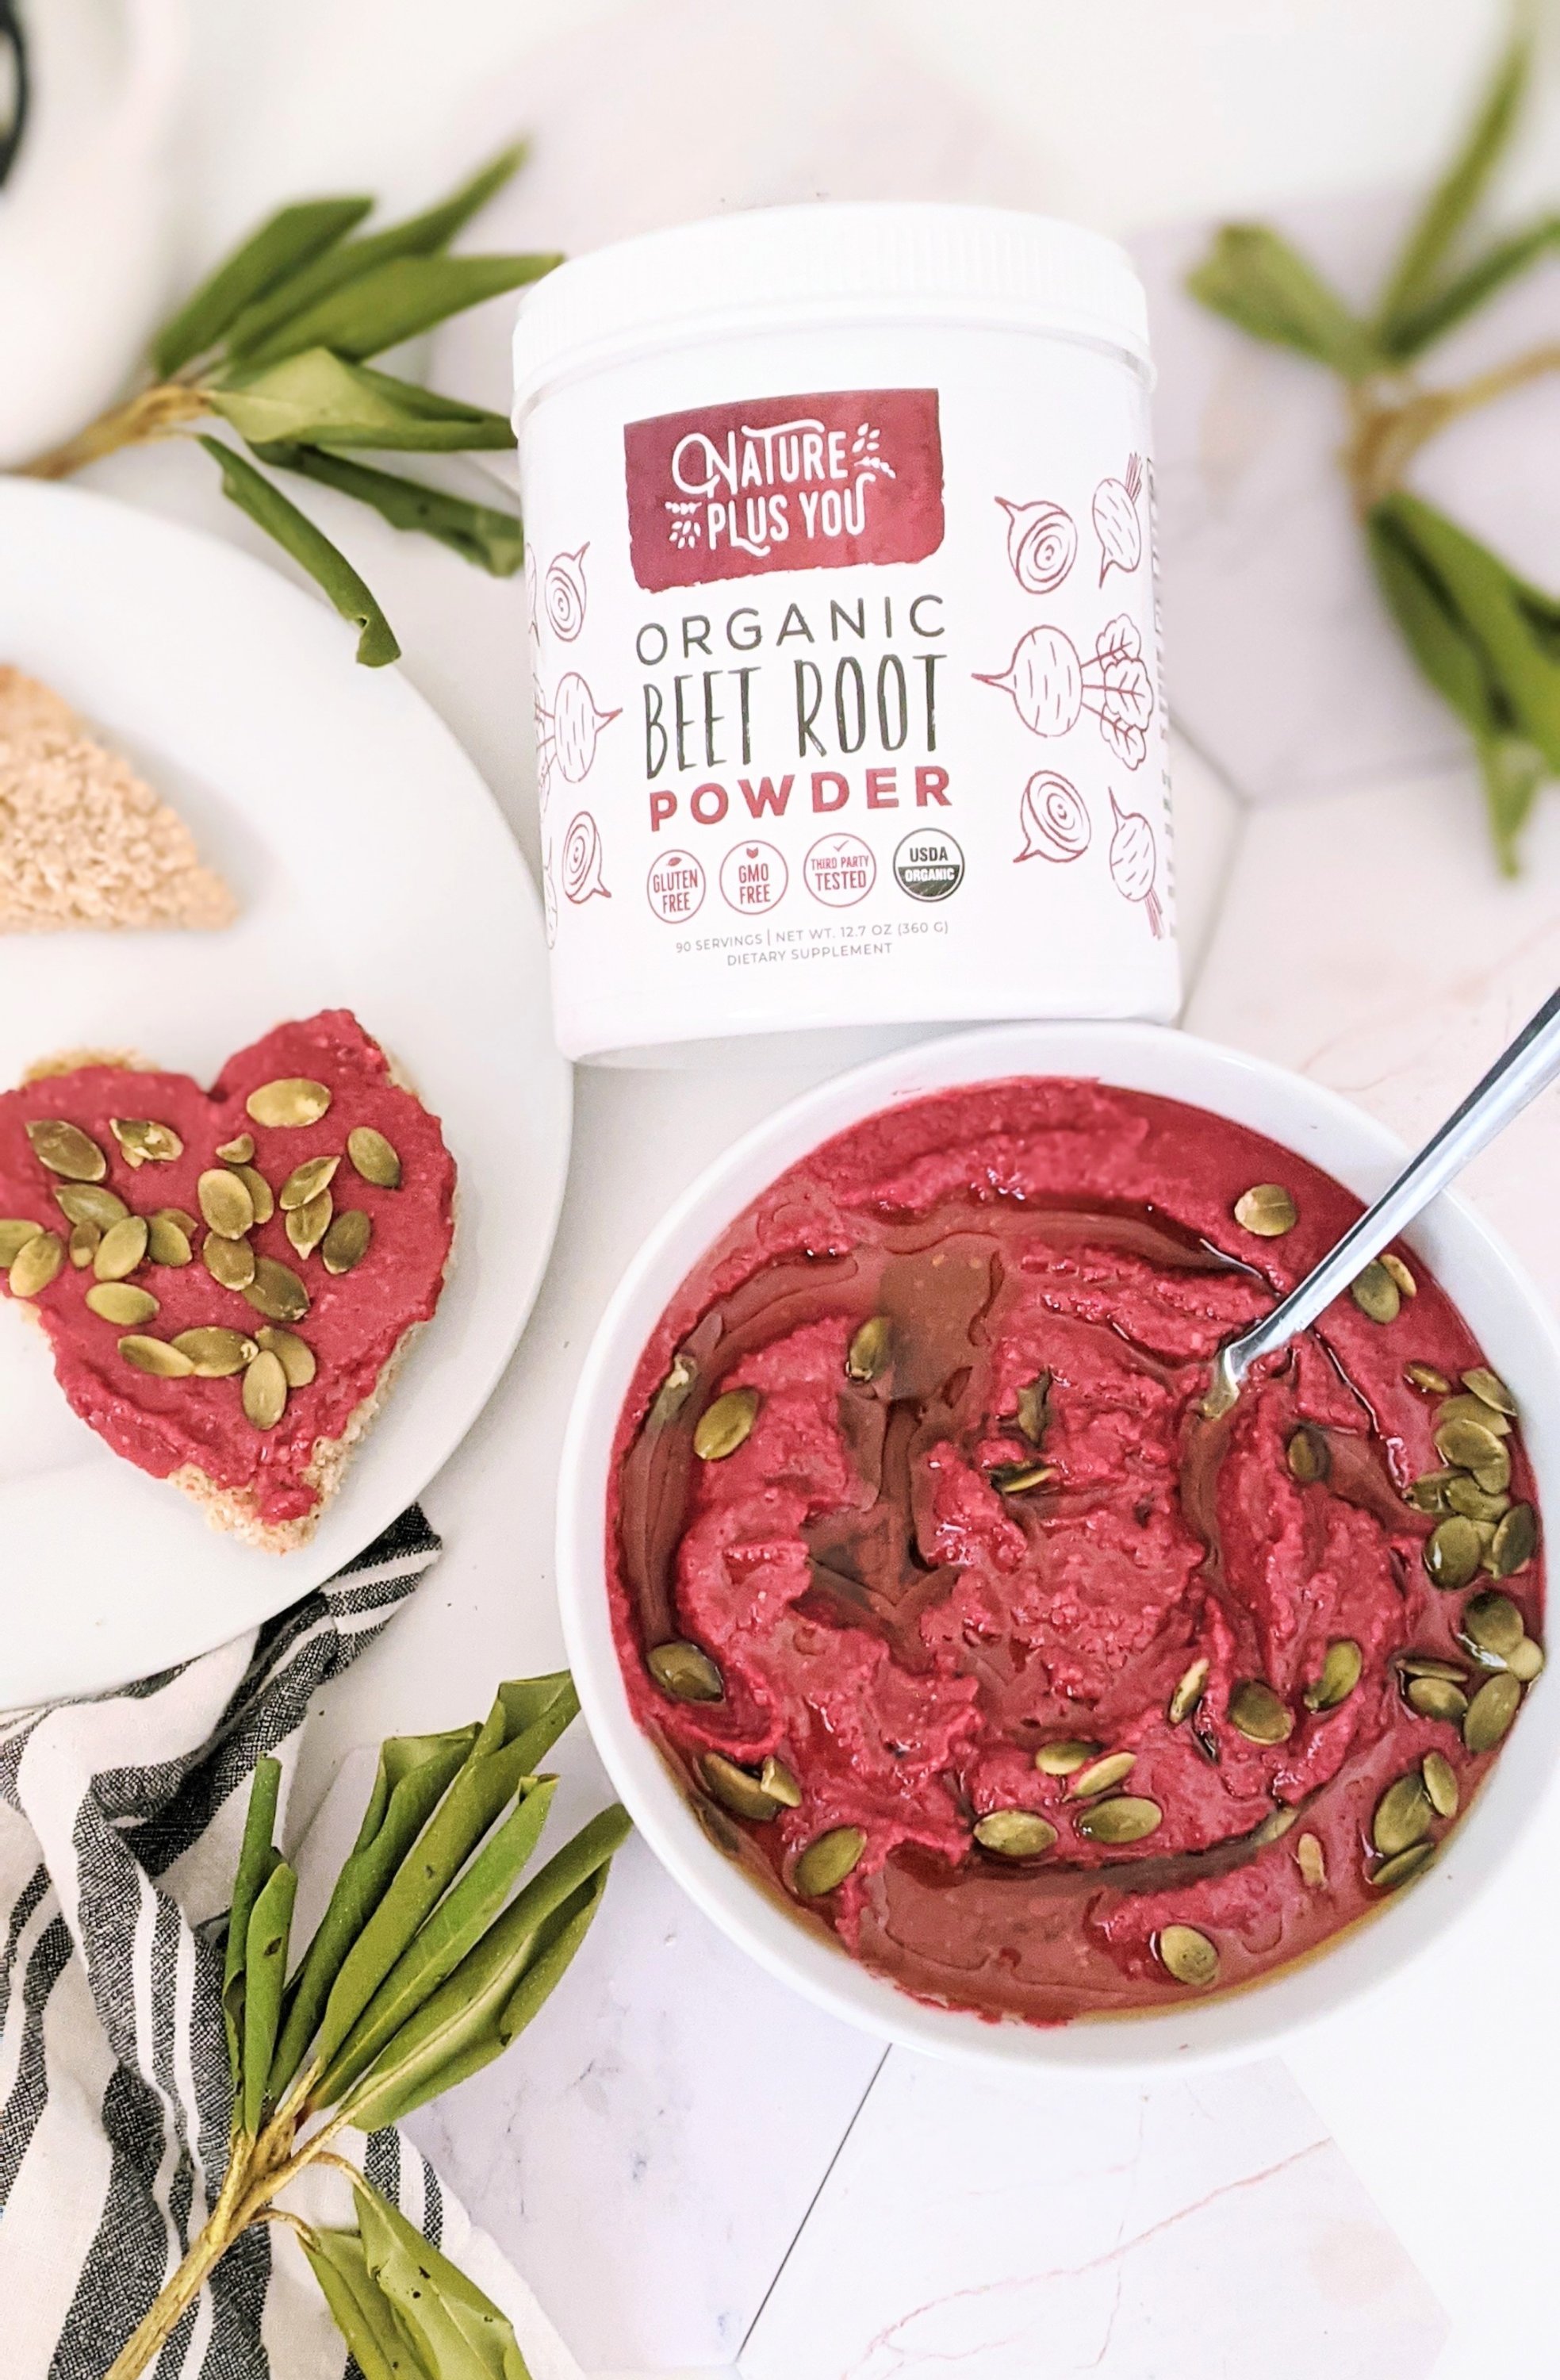 beetroot powder hummus from beet powder recipe ideas healthy vegan vegetarian plant based protein dip recipes hummous hommous recipes gluten free valentine's day snack recipes